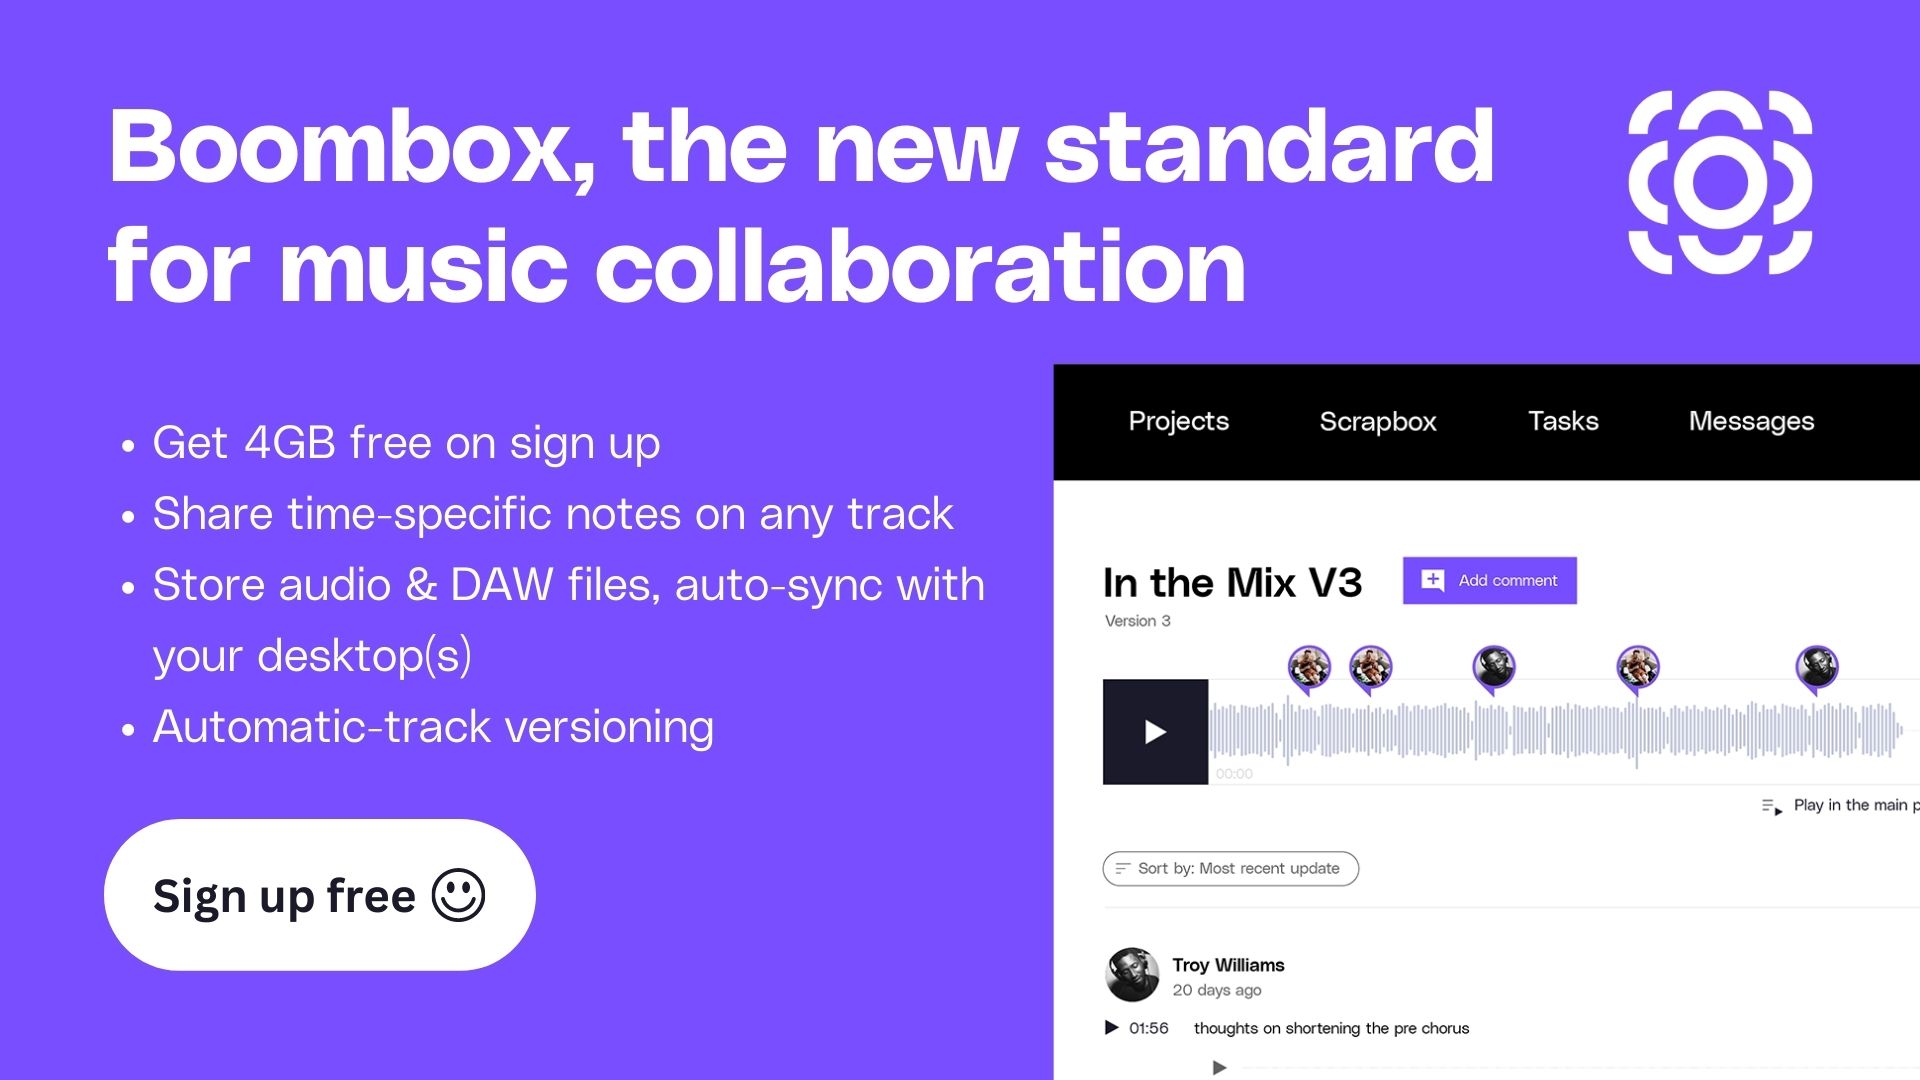 boombox: the home of music collaboration